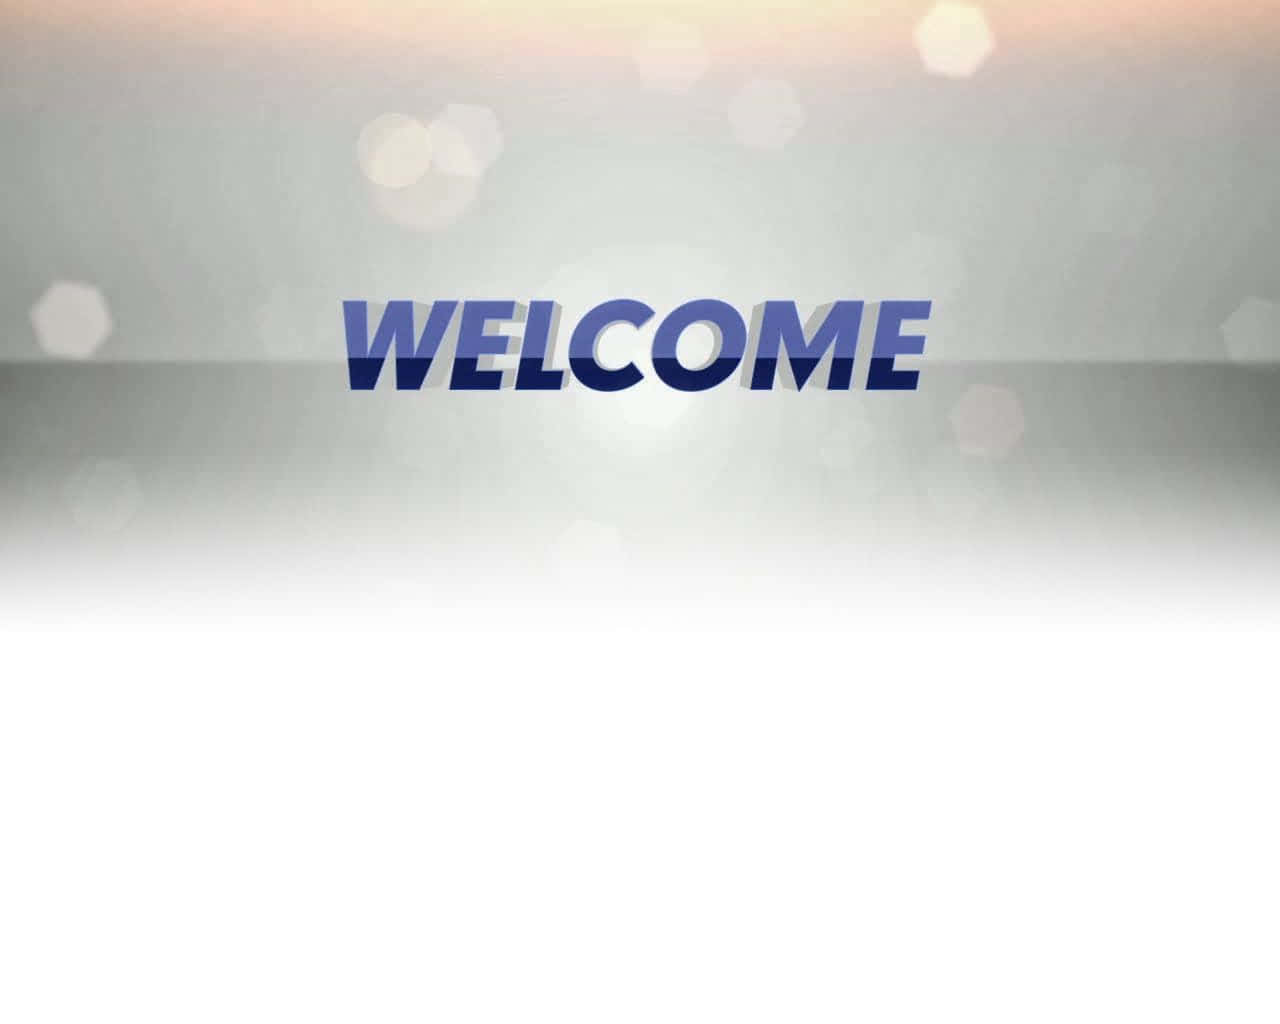 Welcome Banner With Blue And White Text